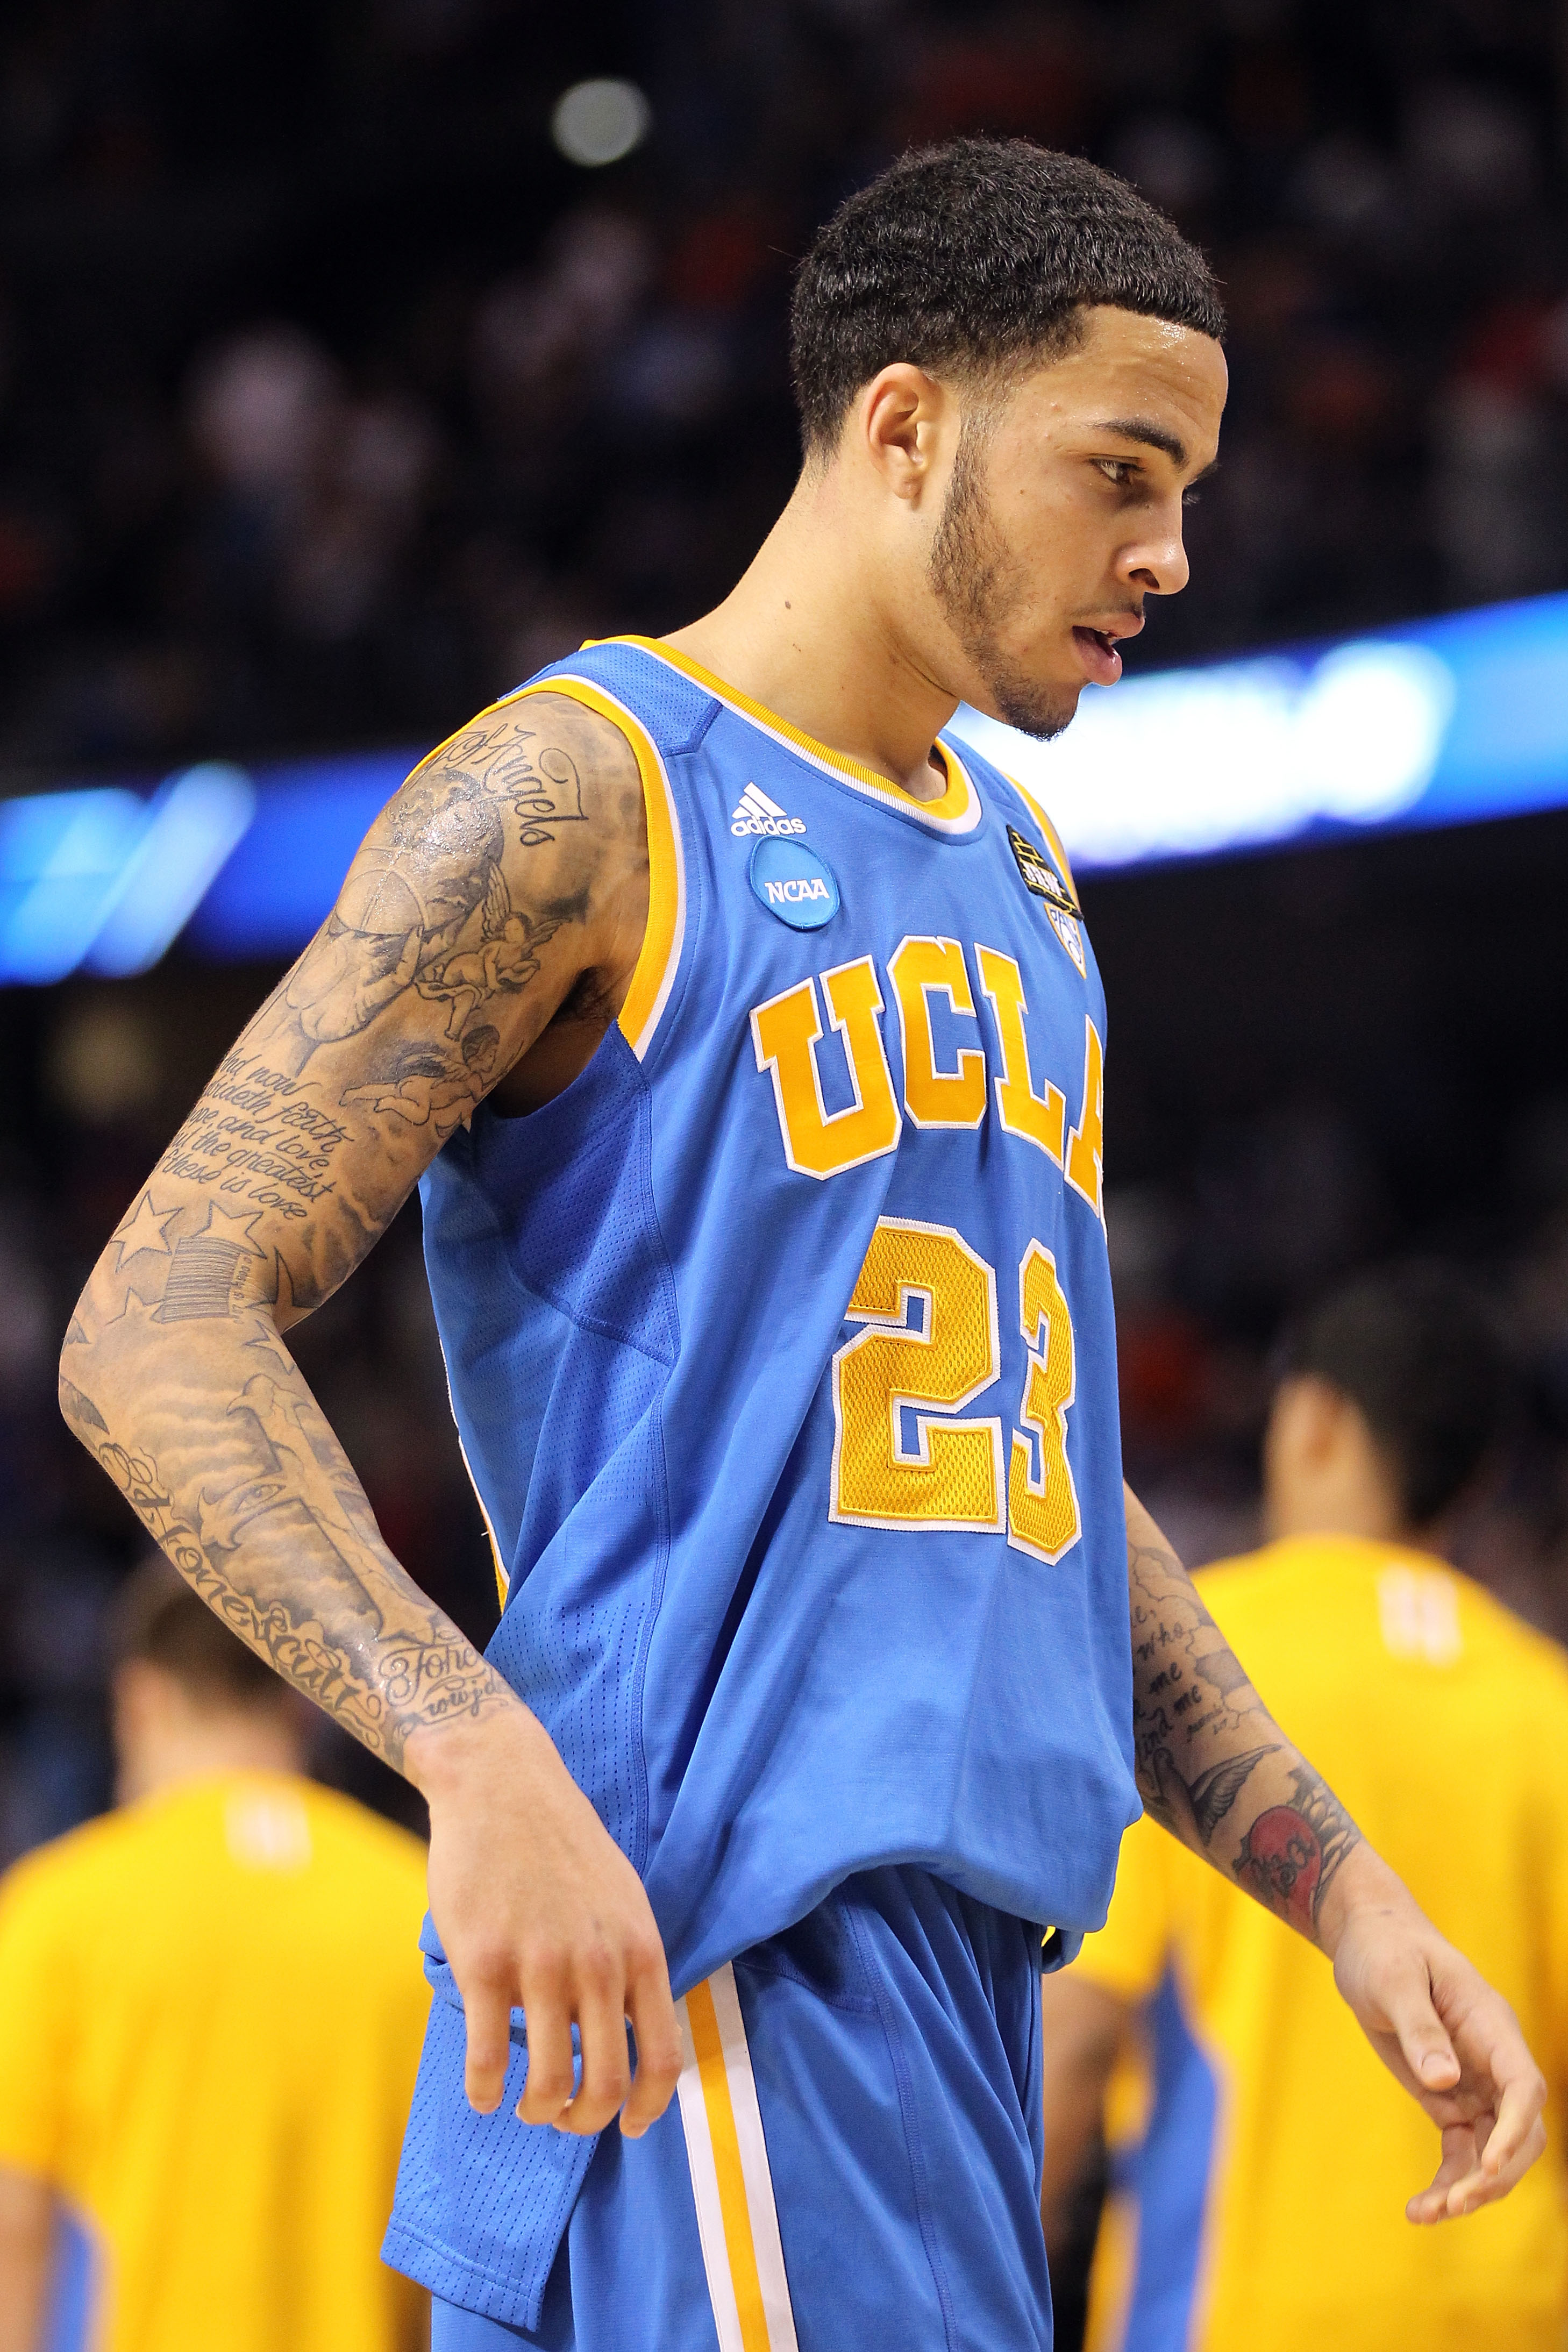 TAMPA, FL - MARCH 19:  Tyler Honeycutt #23 of the UCLA Bruins walks off the court dejected after they lost 73-65 against the Florida Gators during the third round of the 2011 NCAA men's basketball tournament at St. Pete Times Forum on March 19, 2011 in Ta